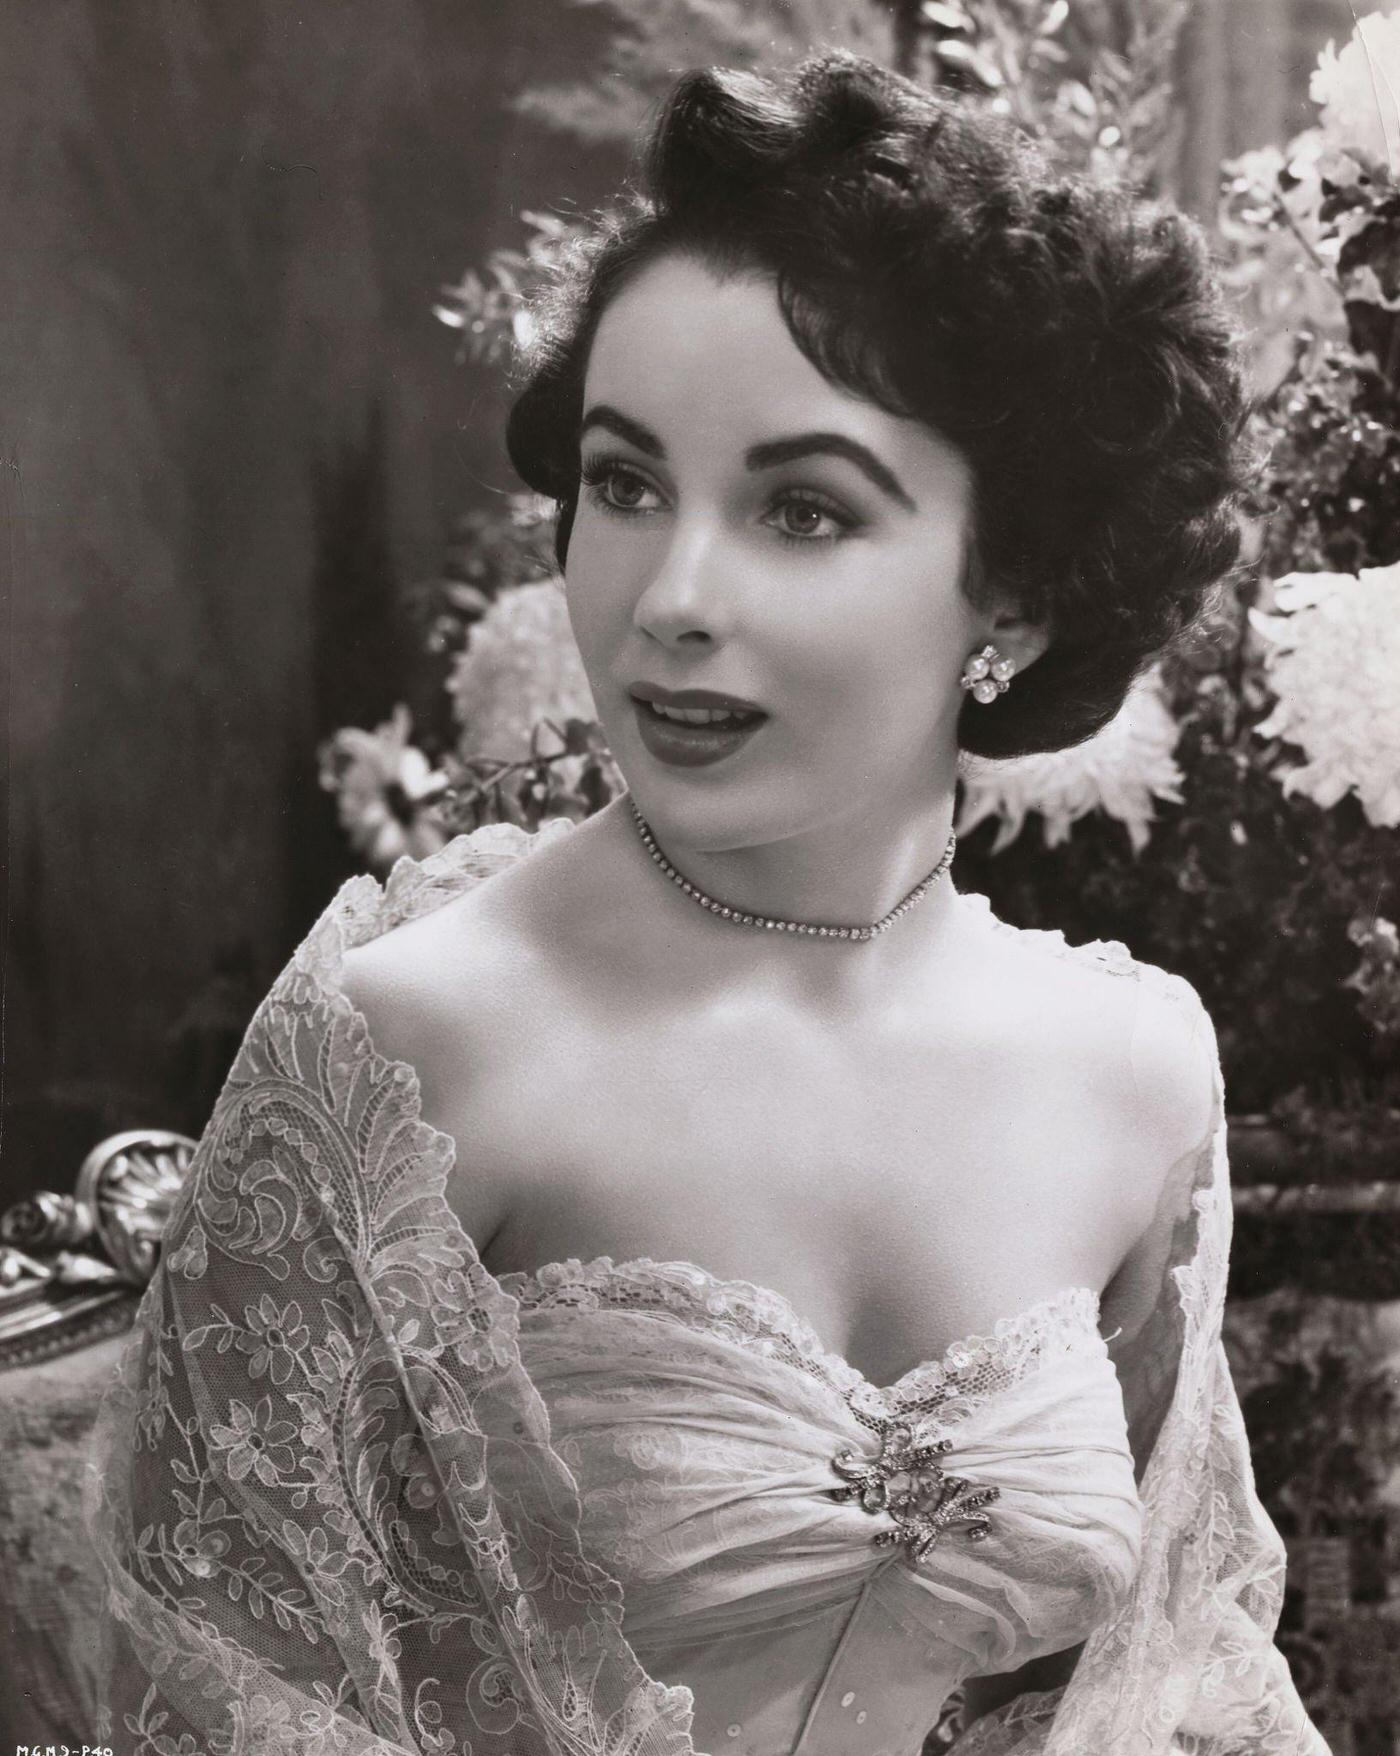 Elizabeth Taylor in the role of Robert Taylor's wife in the film 'Conspirator', her most mature part to date, directed by Victor Saville, 1949.